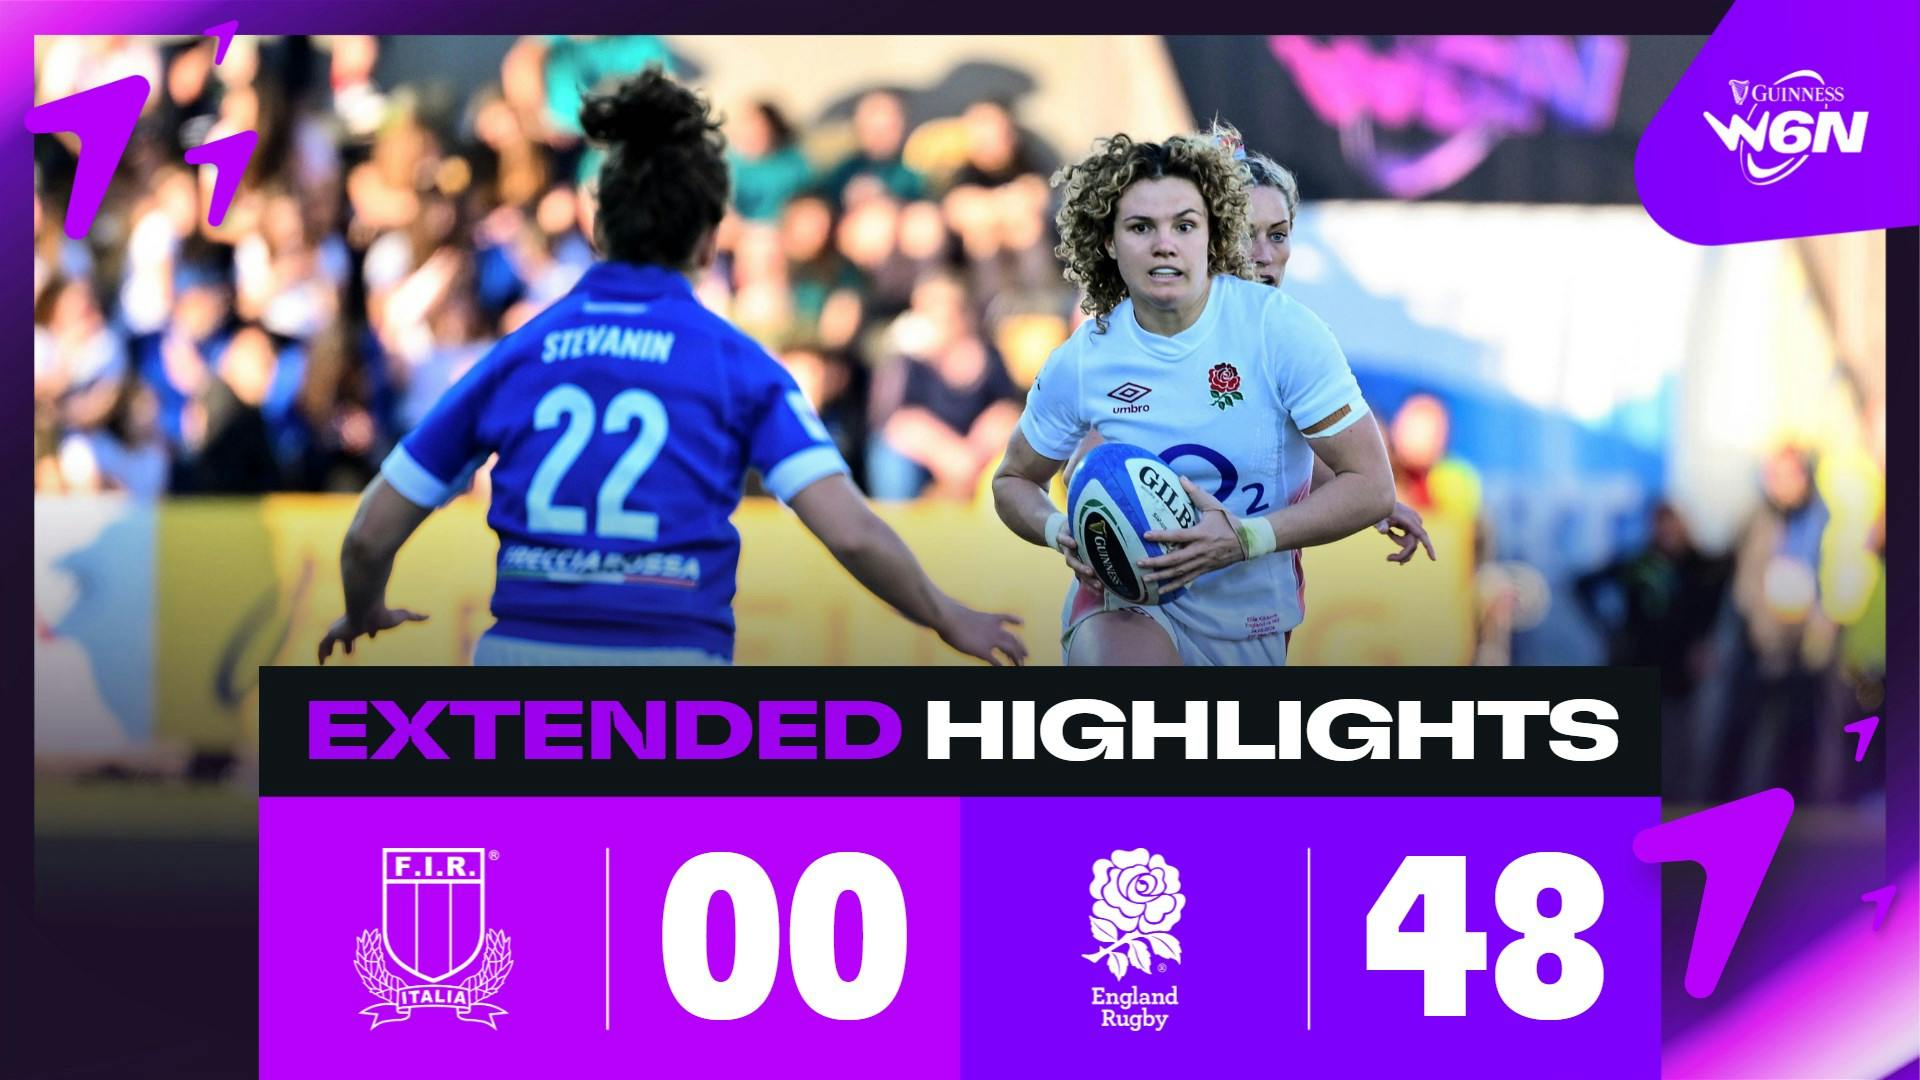 EXTENDED HIGHLIGHTS | GUINNESS WOMEN'S SIX NATIONS | ITALY V ENGLAND